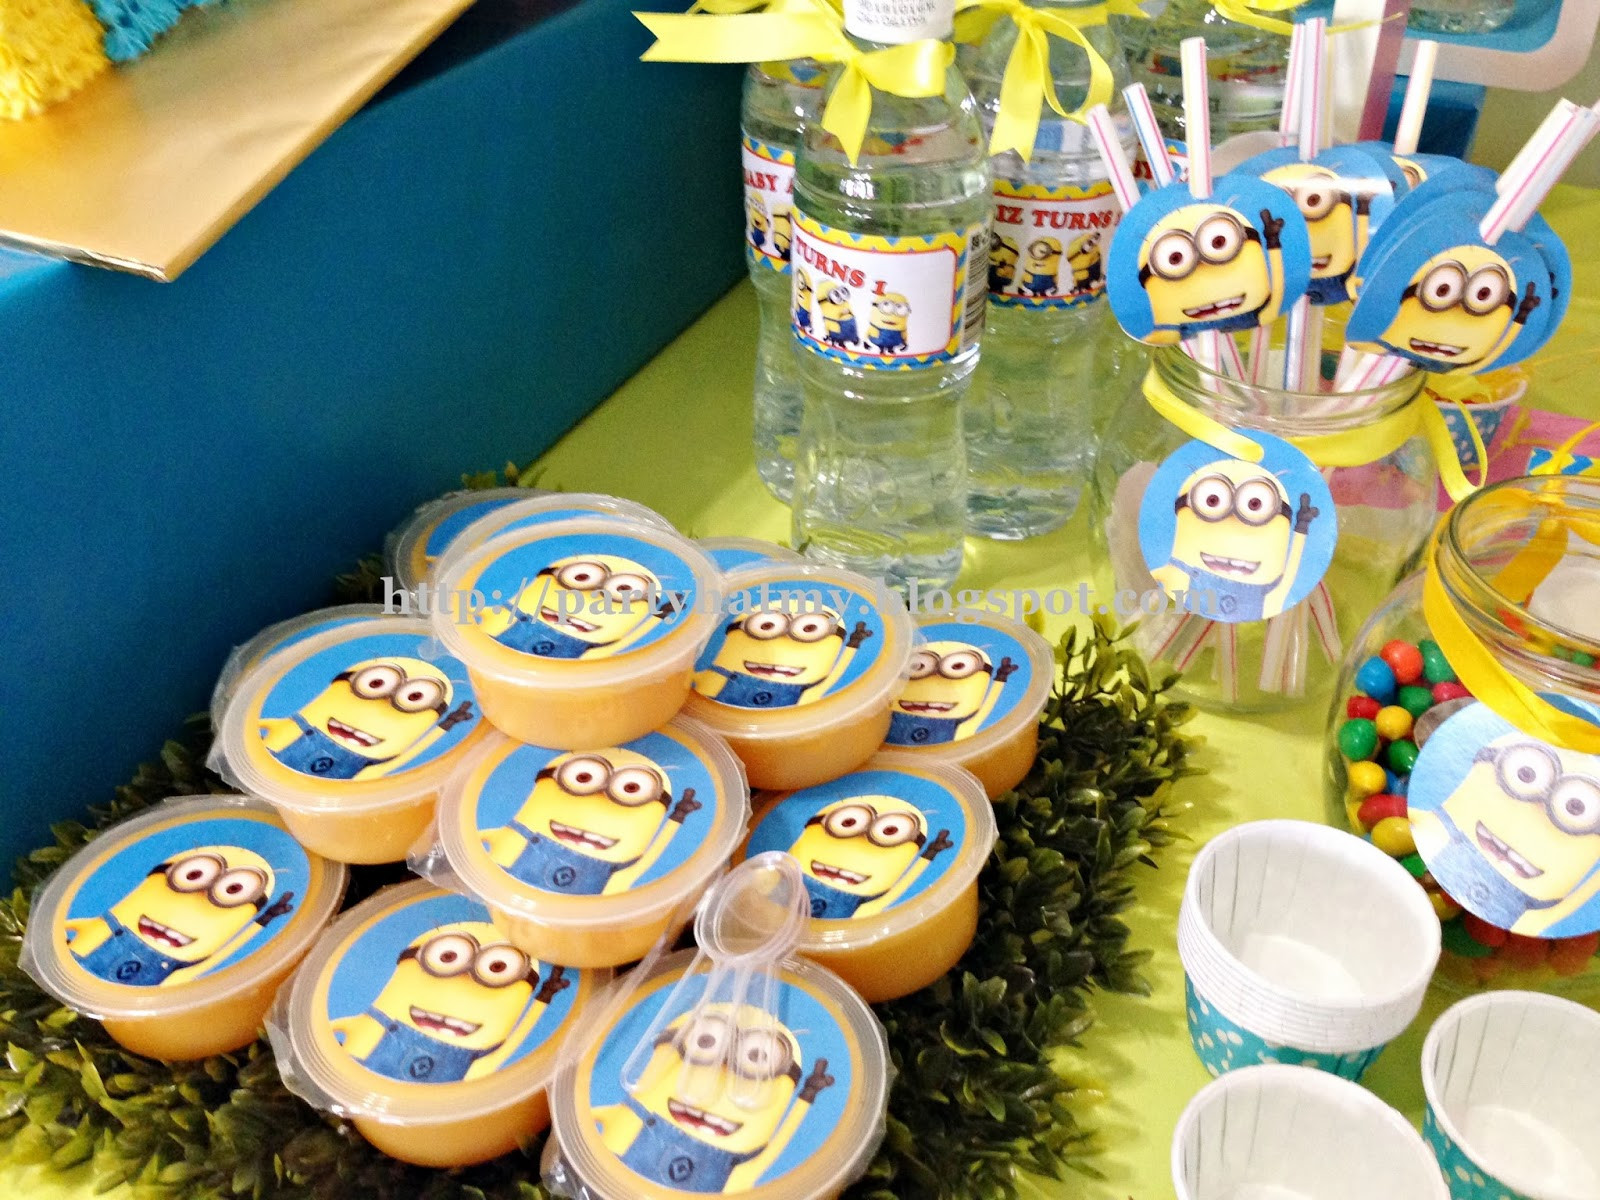 Minion Birthday Party Decorations
 Party Hat Minions 1st Birthday Party